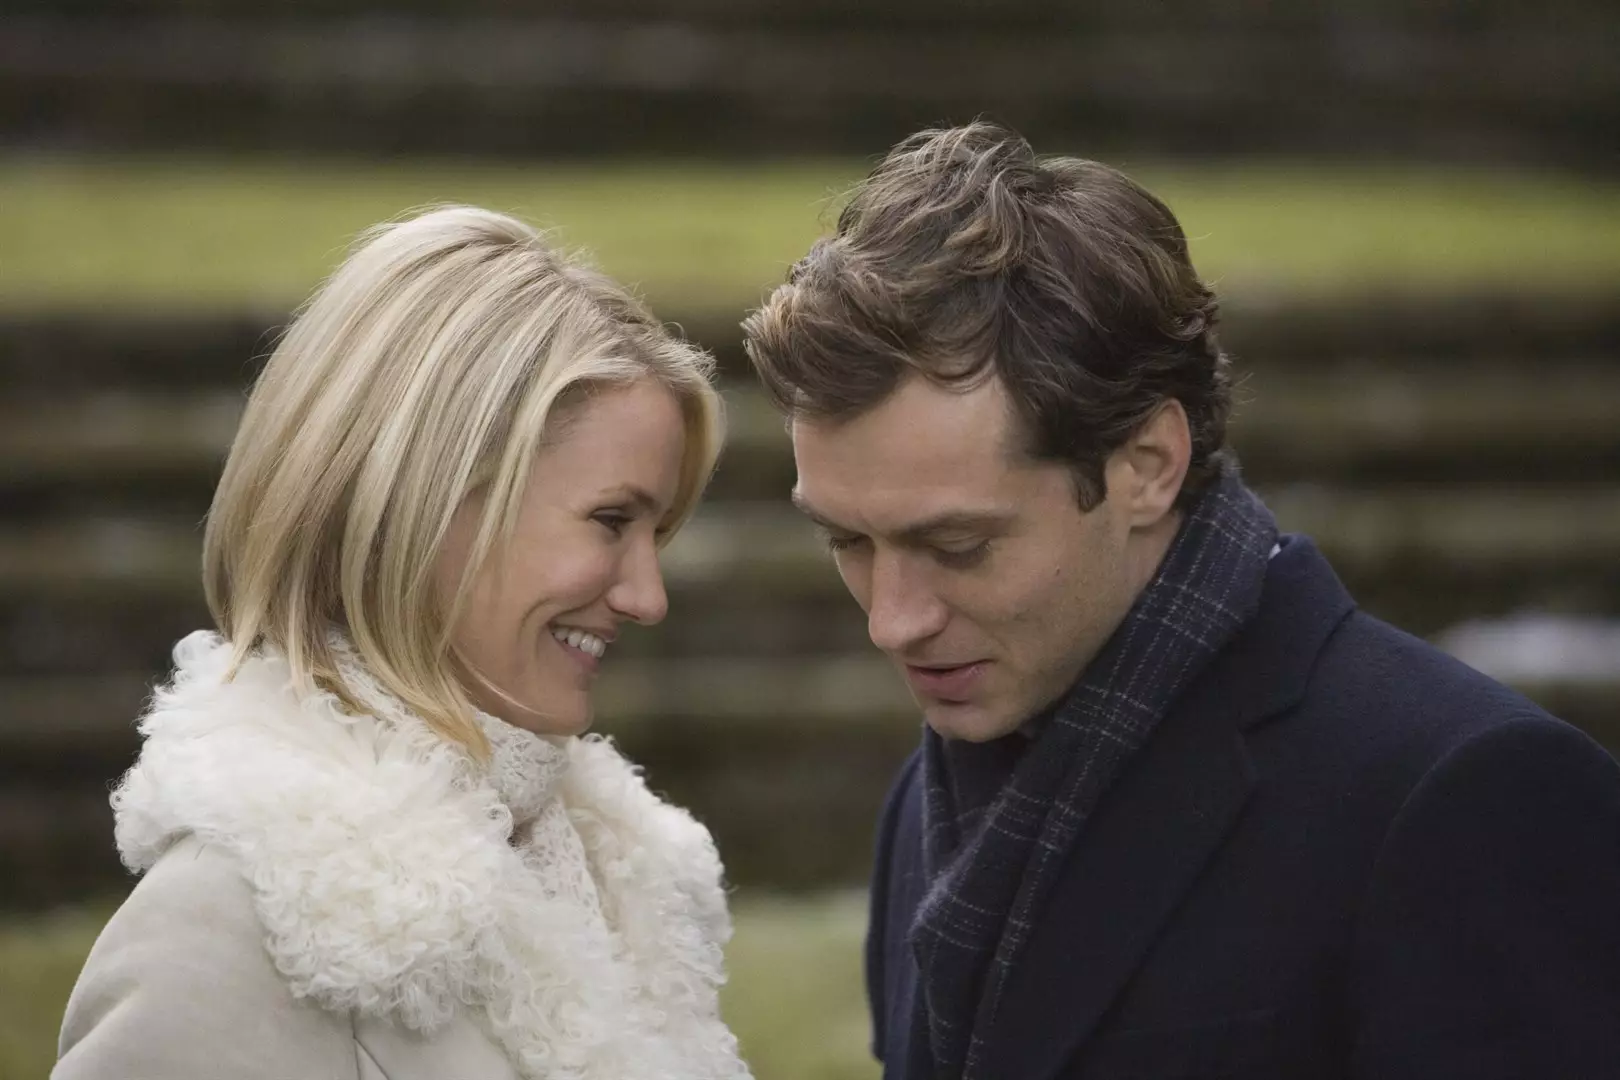 Jude Law, Kate Winslet, Cameron Diaz and Jack Black star in this sweet holiday film (